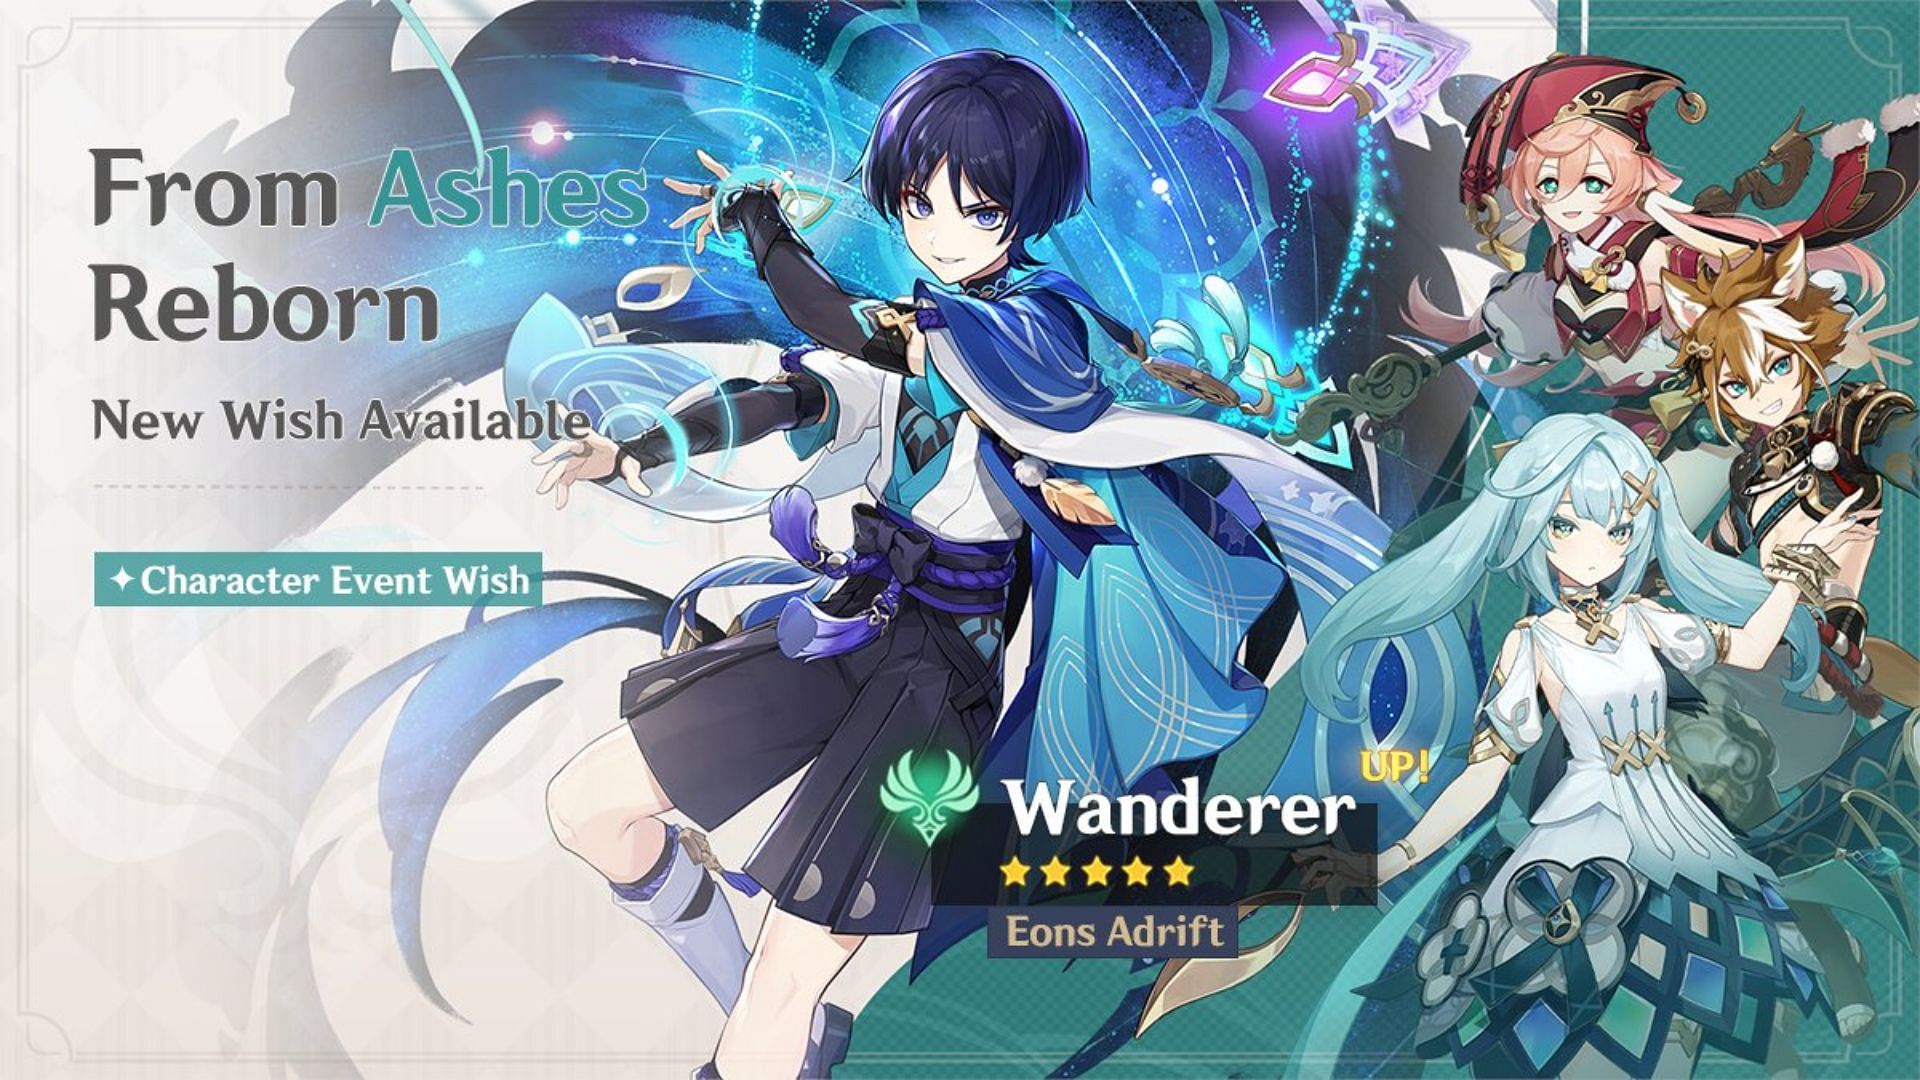 Official event wish banner reveal (Image via HoYoverse)